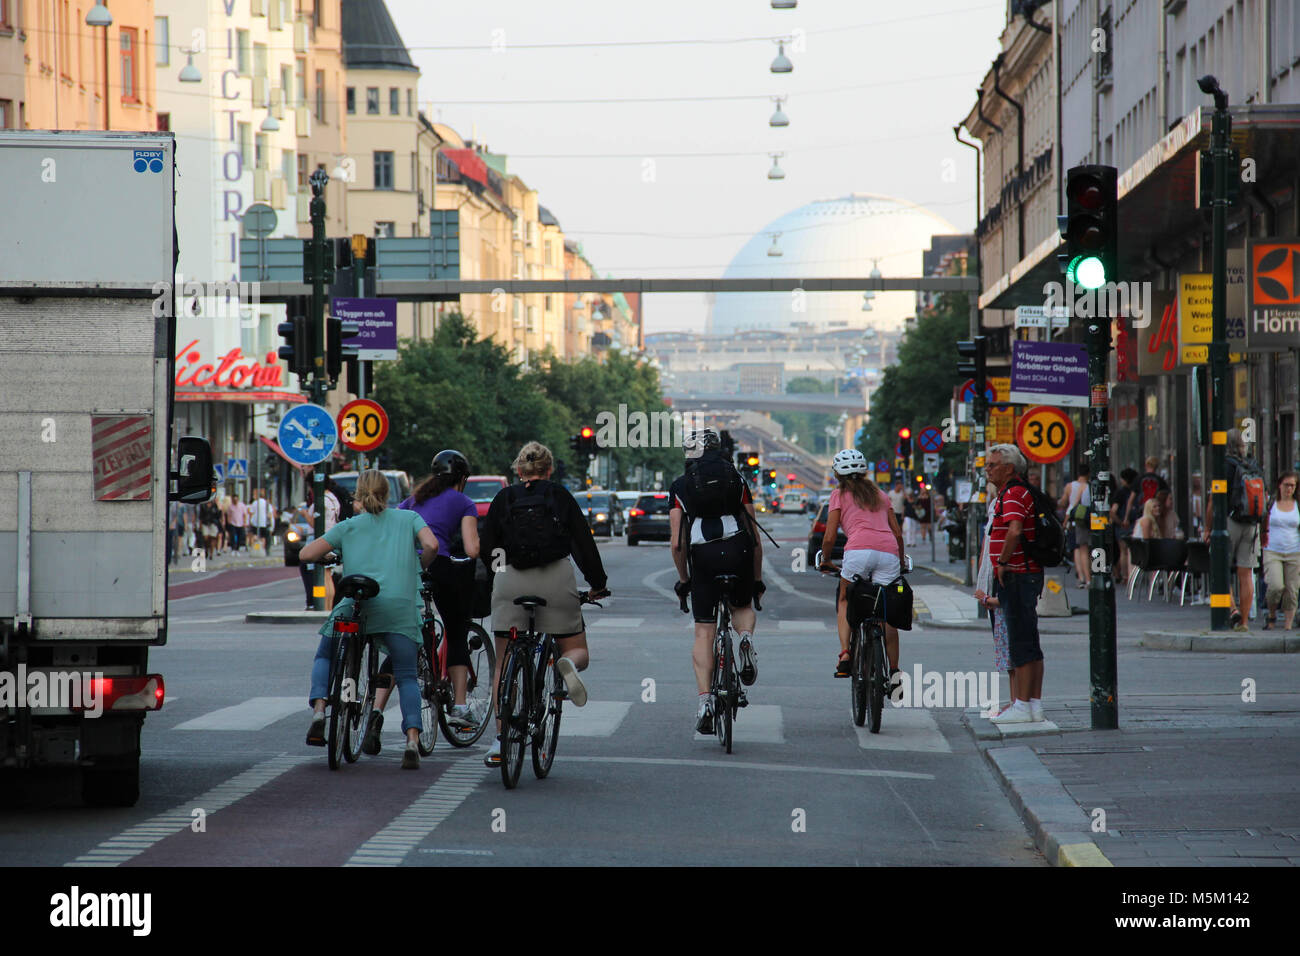 People on bicycles on the street Götgatan on Södermalm in central Stockholm. Stock Photo